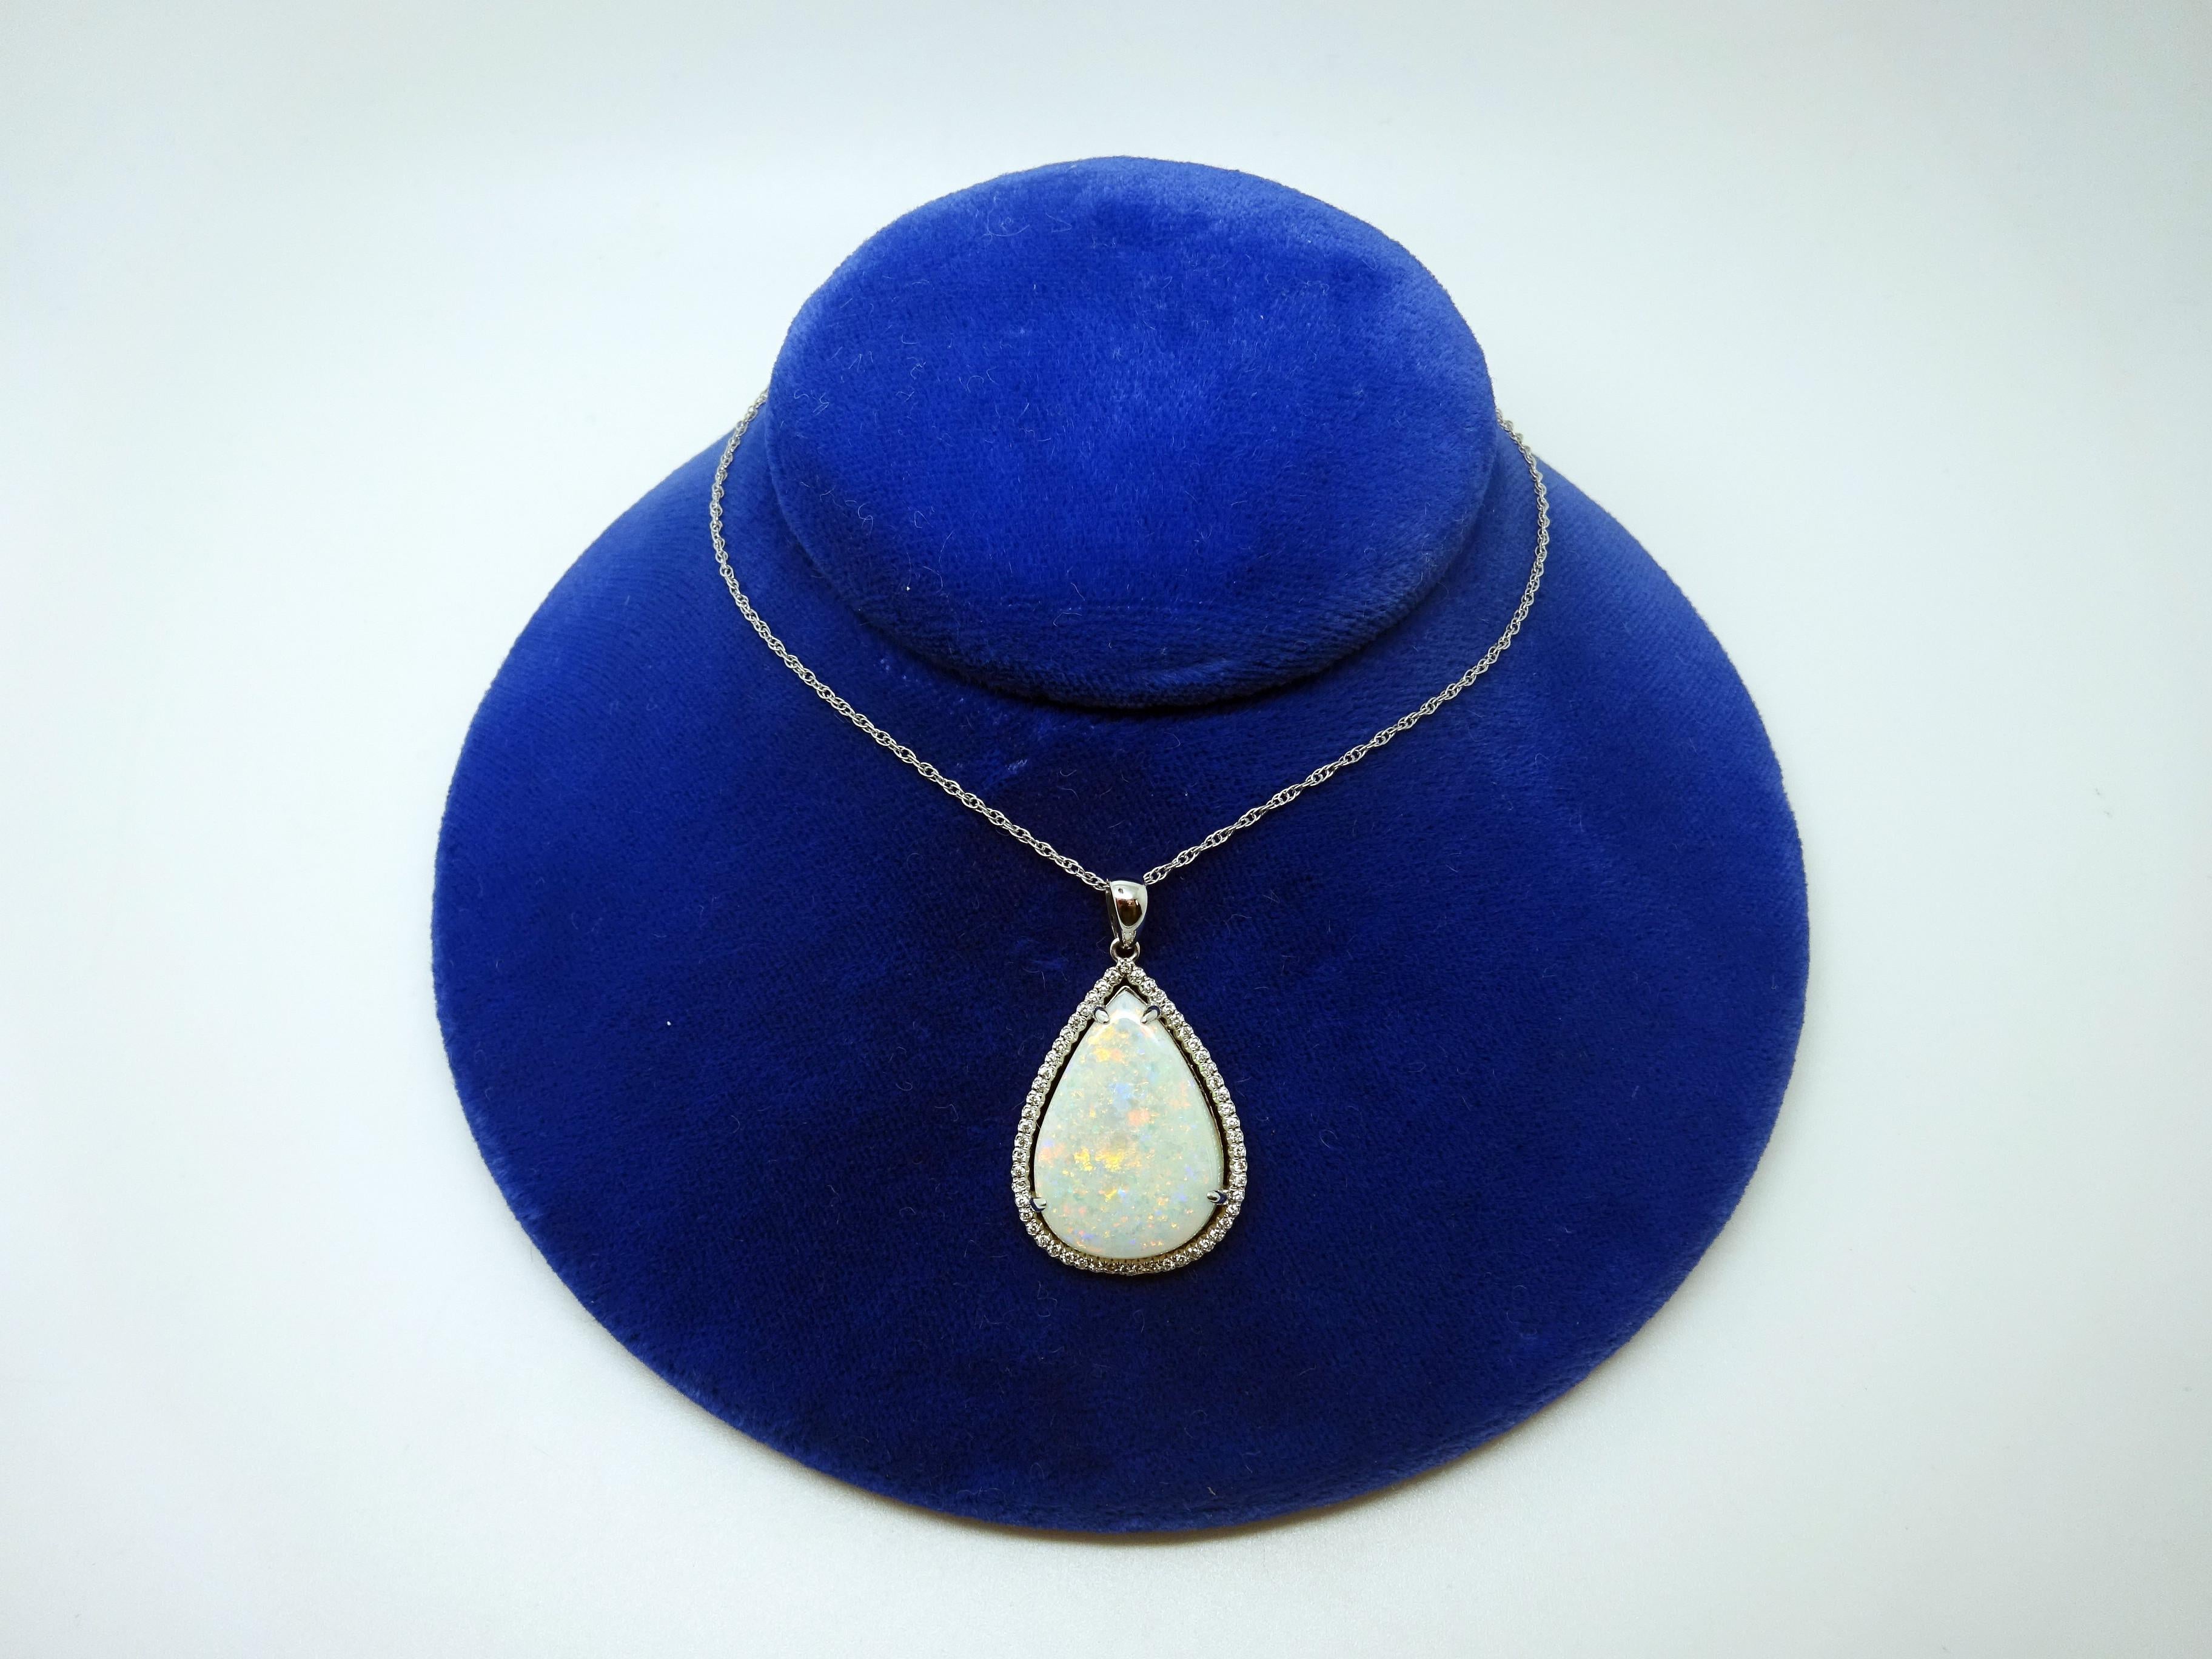 14k Gold 5.67ct Pear Genuine Natural Opal Pendant with .16ct Diamonds '#3427' In Excellent Condition For Sale In Big Bend, WI